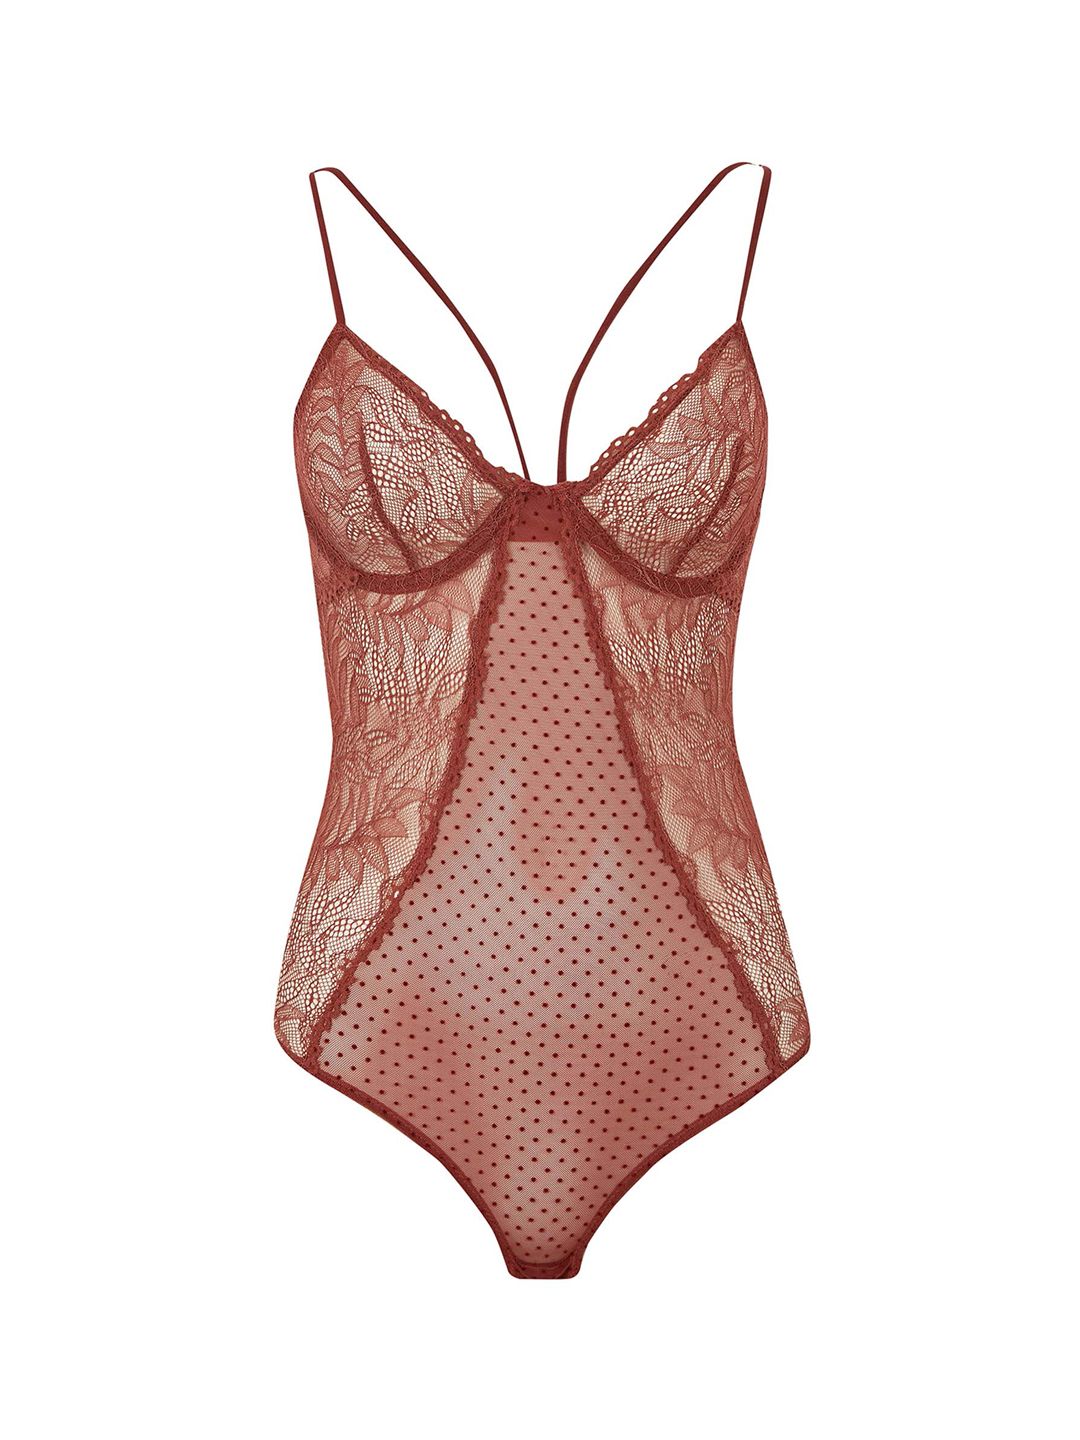 Buy Defacto DeFacto Brown Embroidery Net Bodysuit at Redfynd